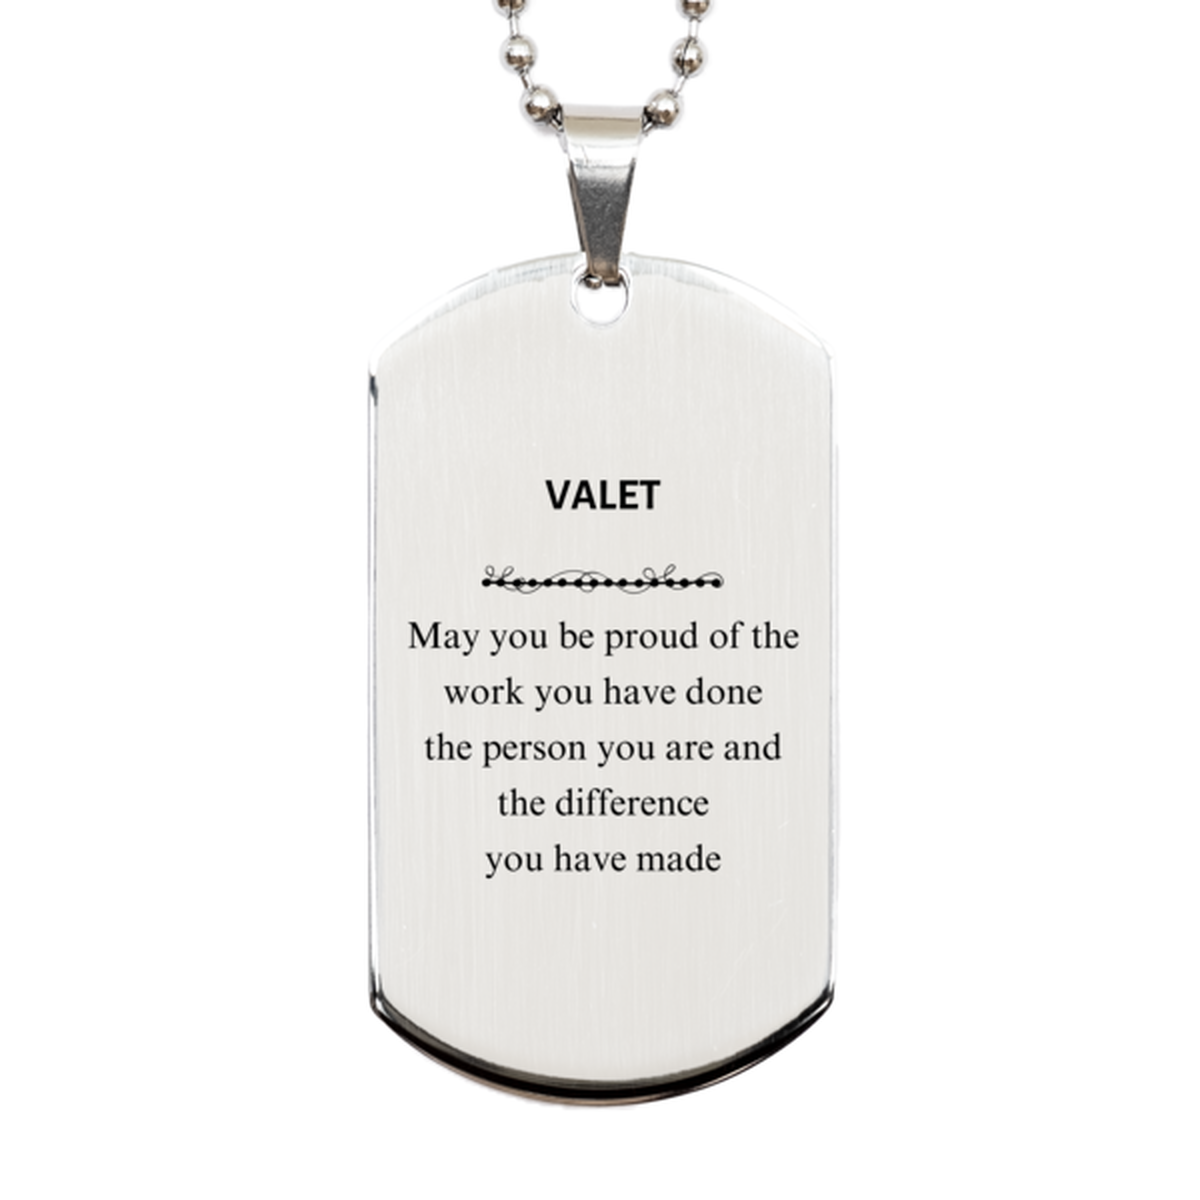 Valet May you be proud of the work you have done, Retirement Valet Silver Dog Tag for Colleague Appreciation Gifts Amazing for Valet